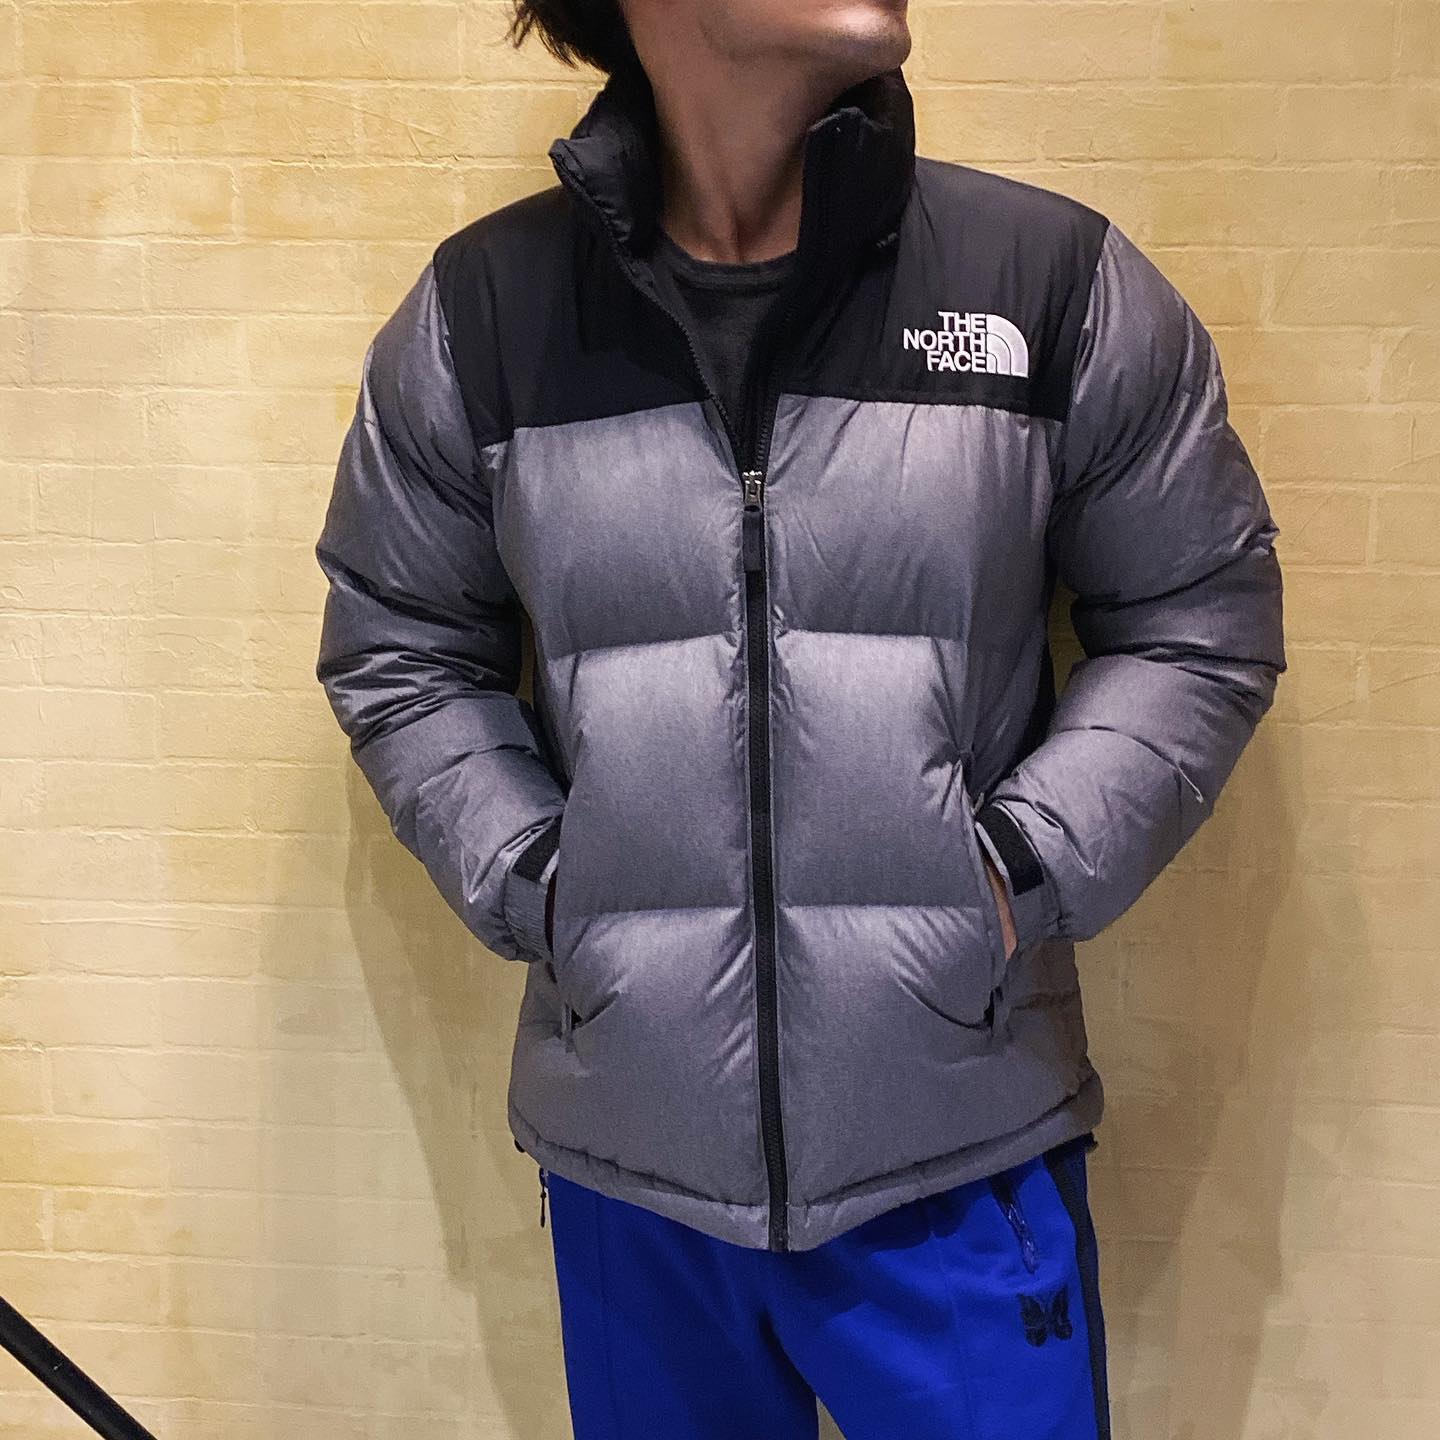 【THE NORTH FACE】ヌプシジャケット グレーは残り僅かです。 | 草津店 | BLOG by GEOGRAPHY SHOP STAFF